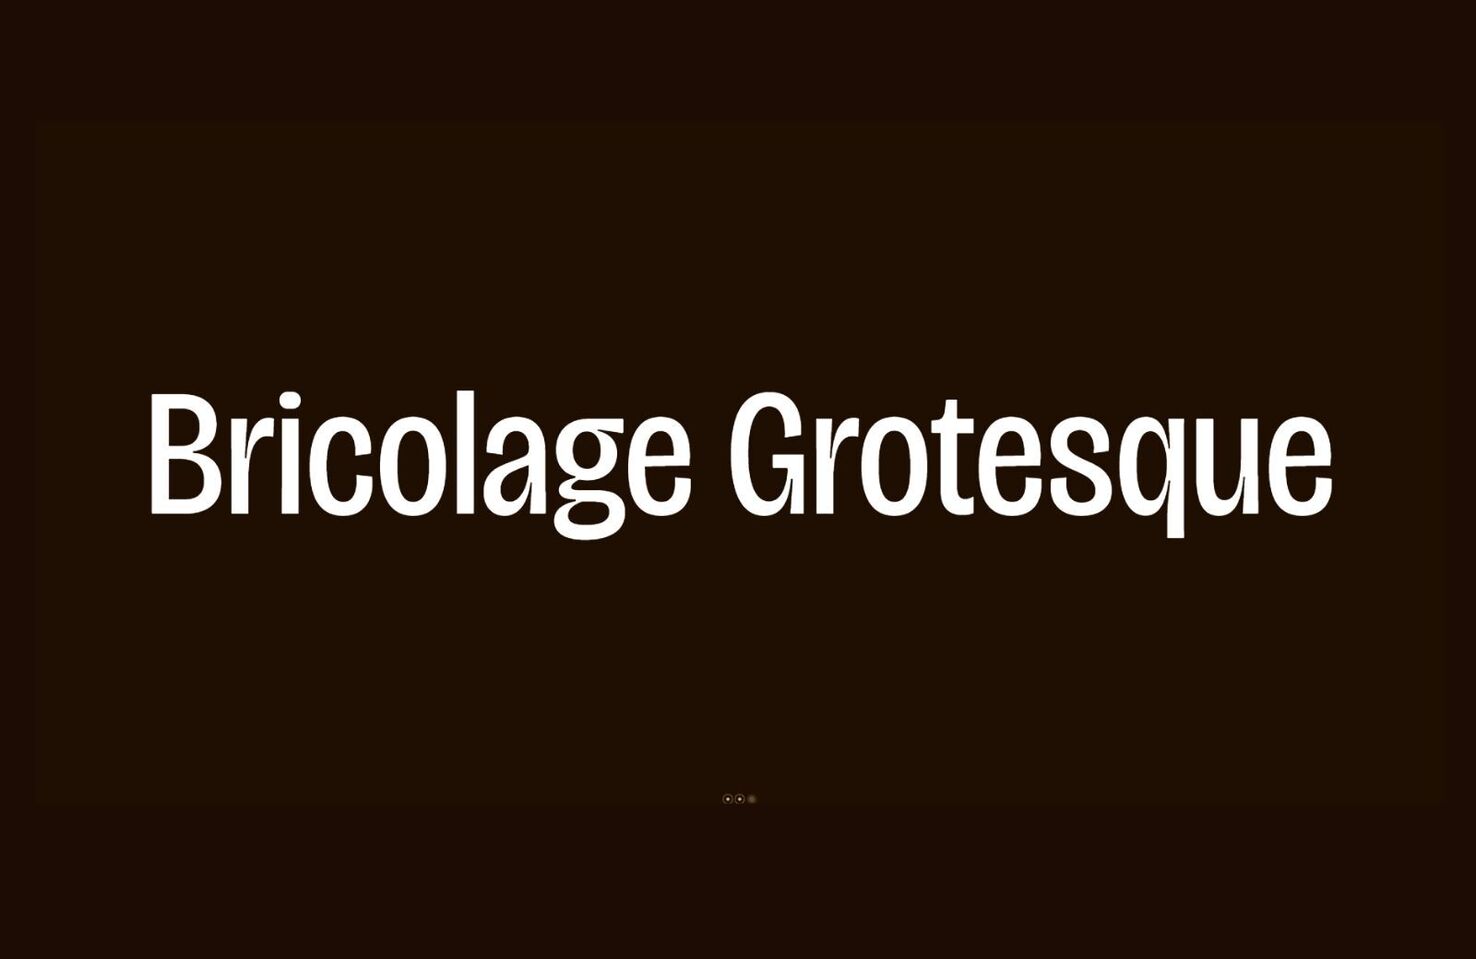 Bricolage Grotesque Condensed SemiBold Font preview